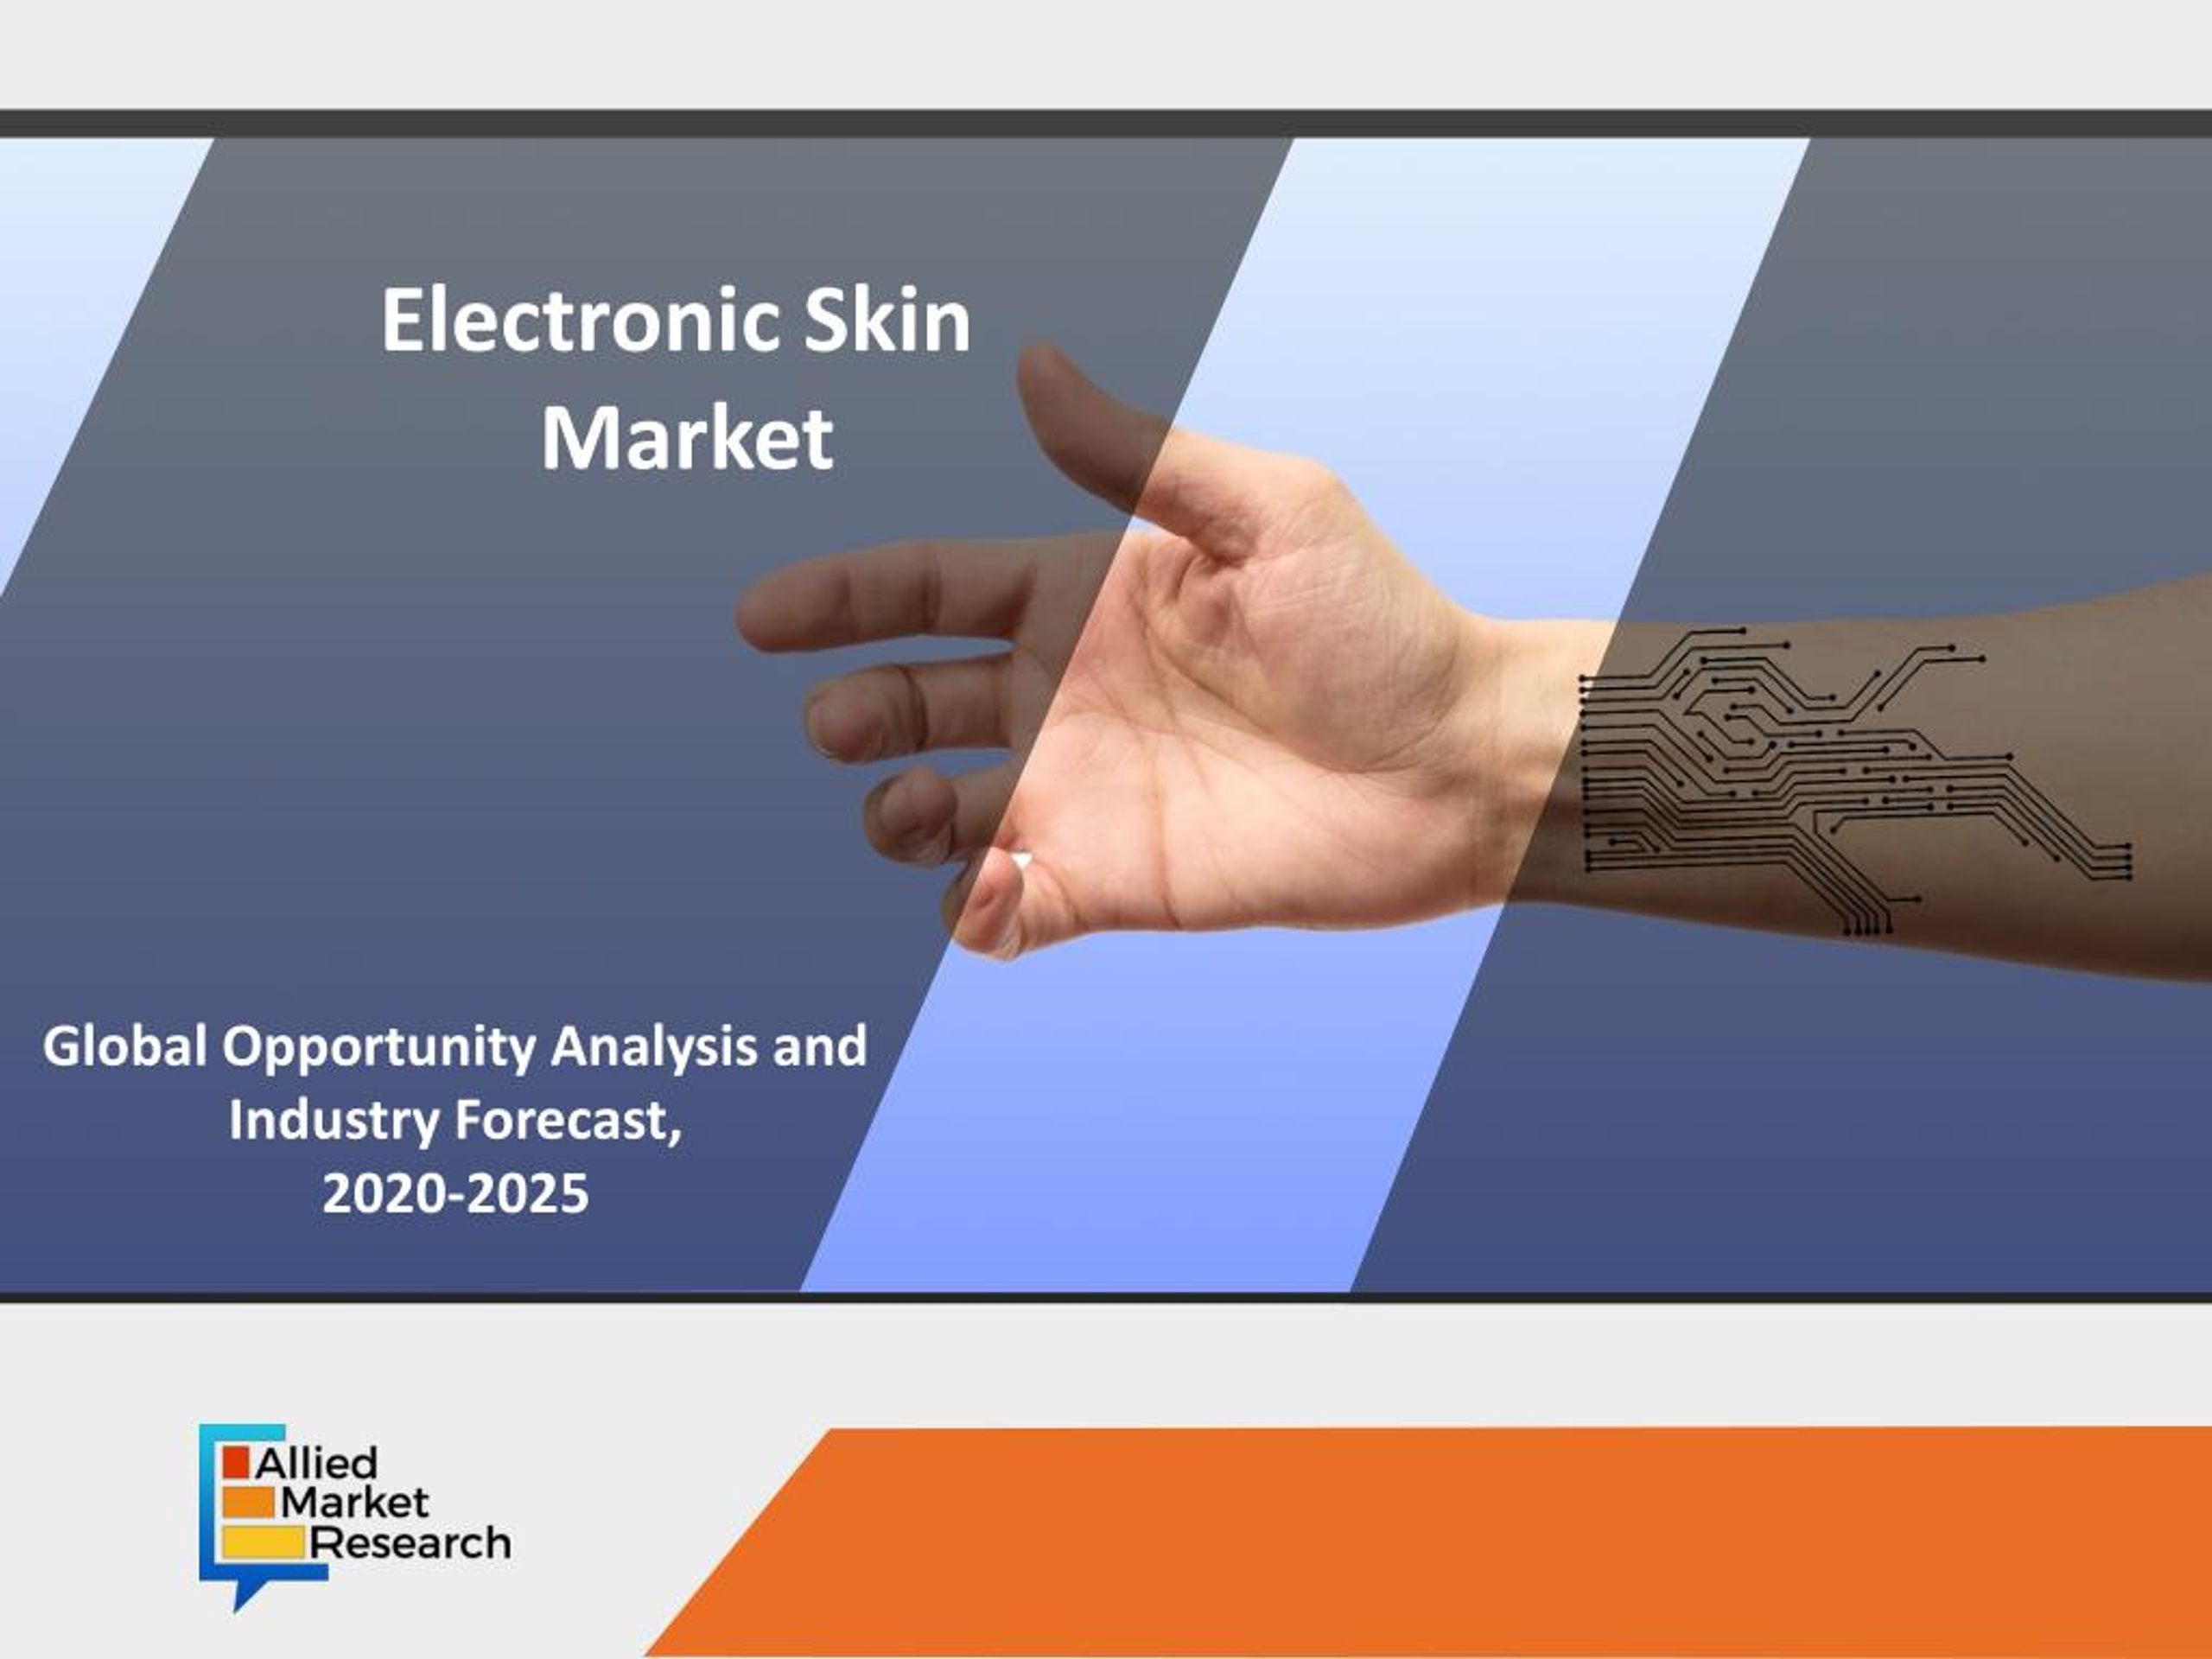 Are digital tattoos the future of wearables? - Digital Health Central